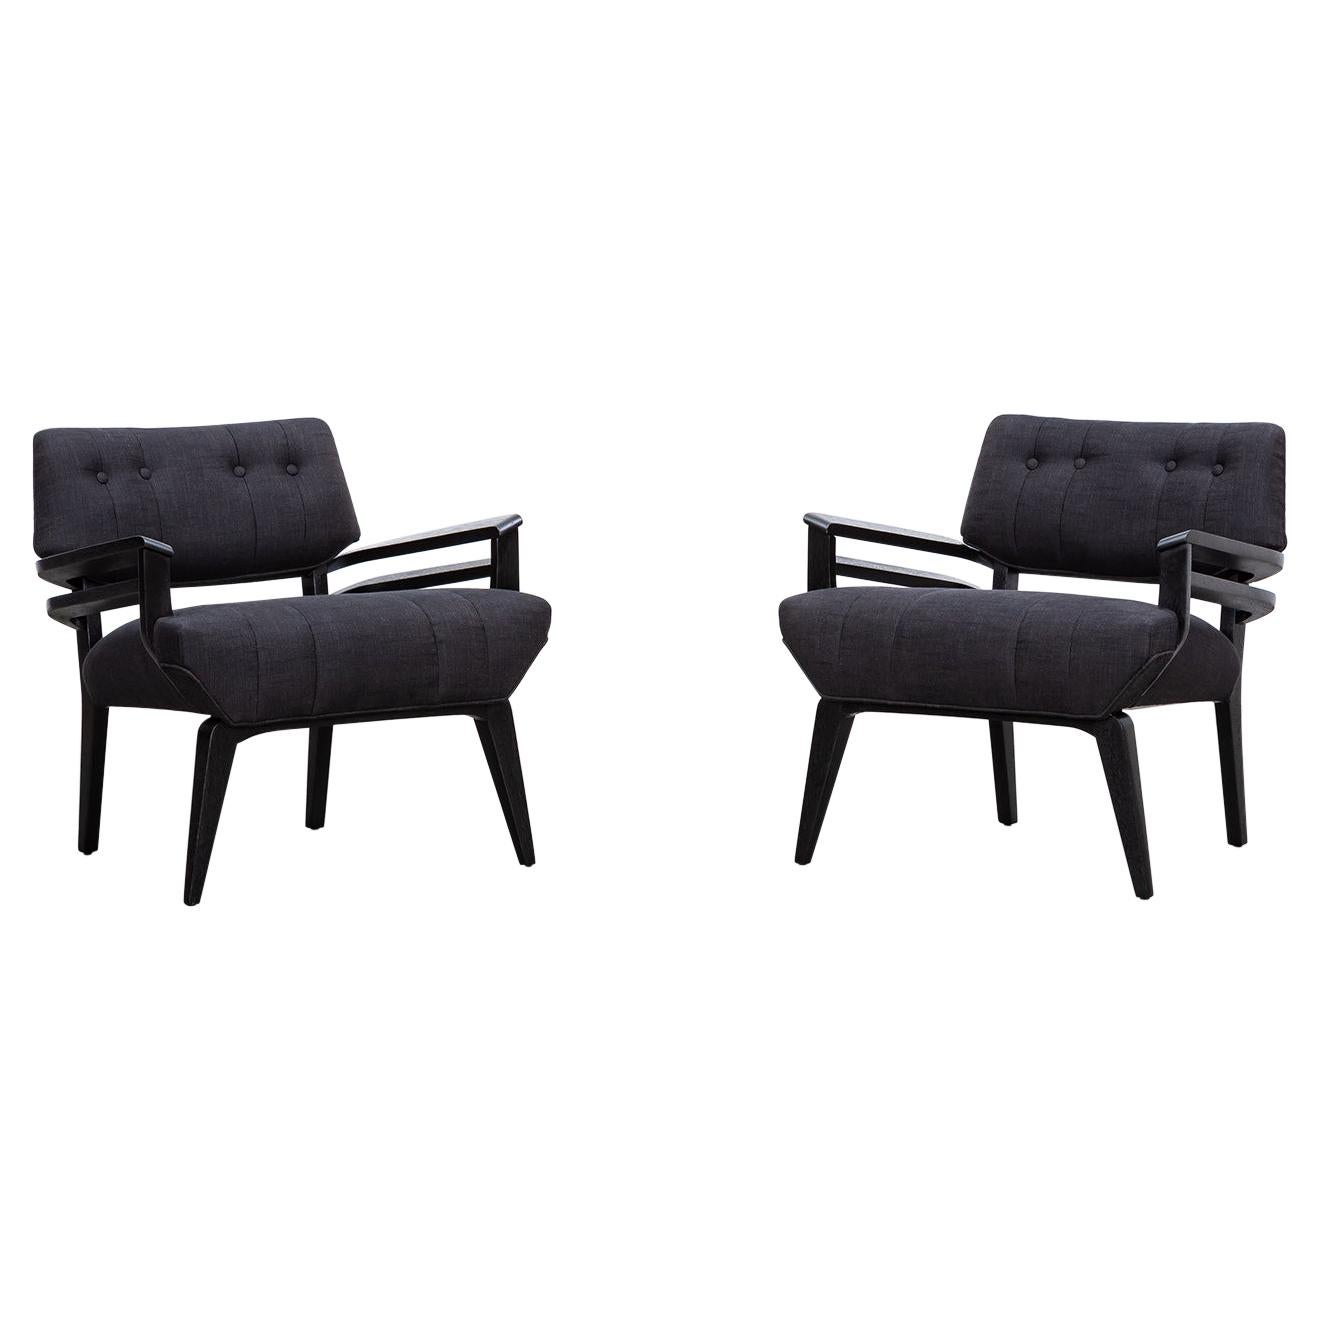 1950s Black Wooden New Upholstery Lounge Chairs by Paul Laszlo